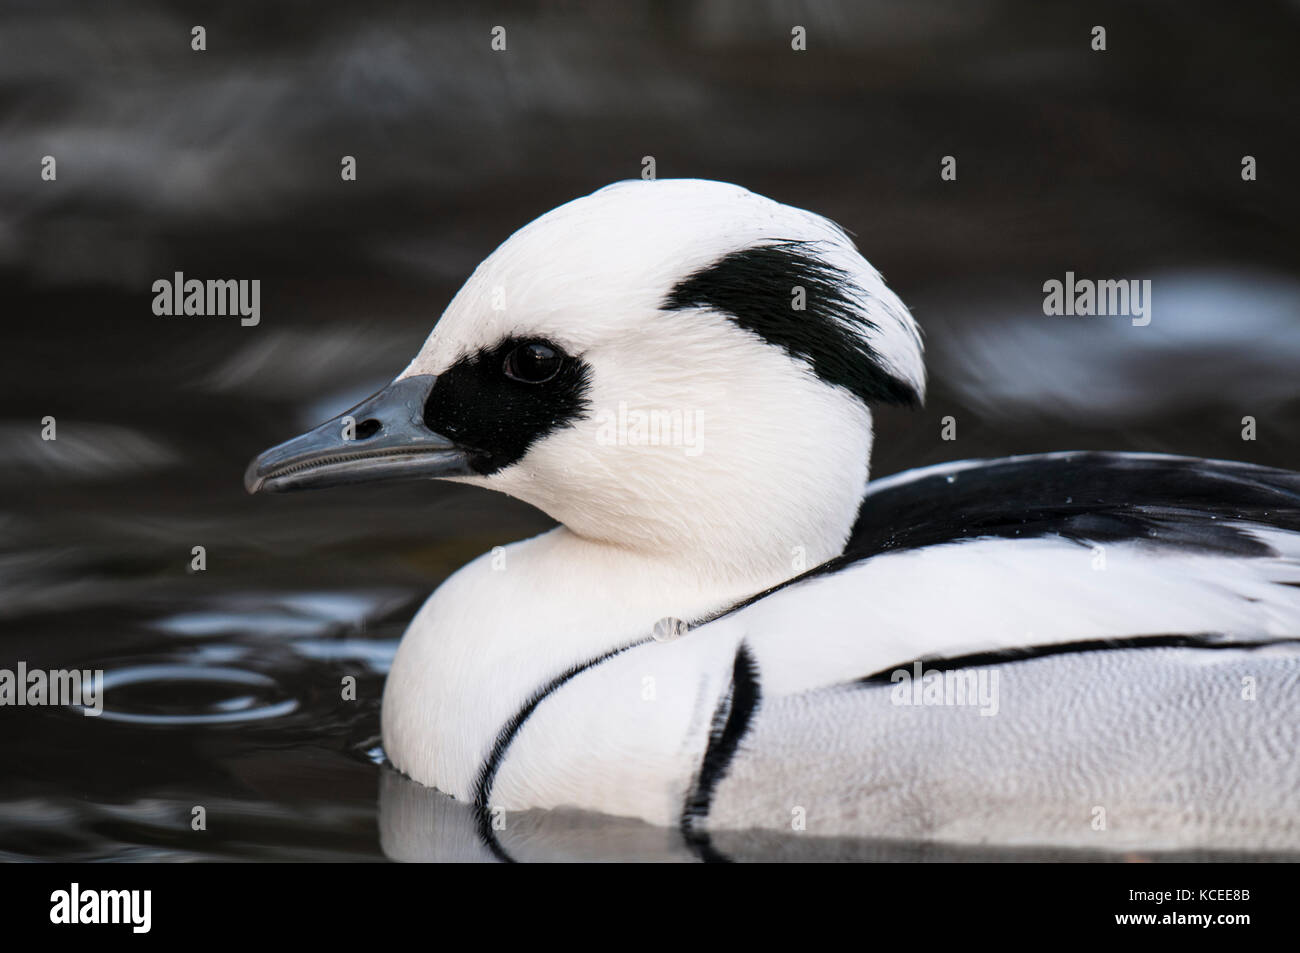 An adult male smew (Mergus albellus) swimming on a freshwater pool at the Wildfowl and Wetland Trust in Washington, Tyne and Wear. December. Captive s Stock Photo